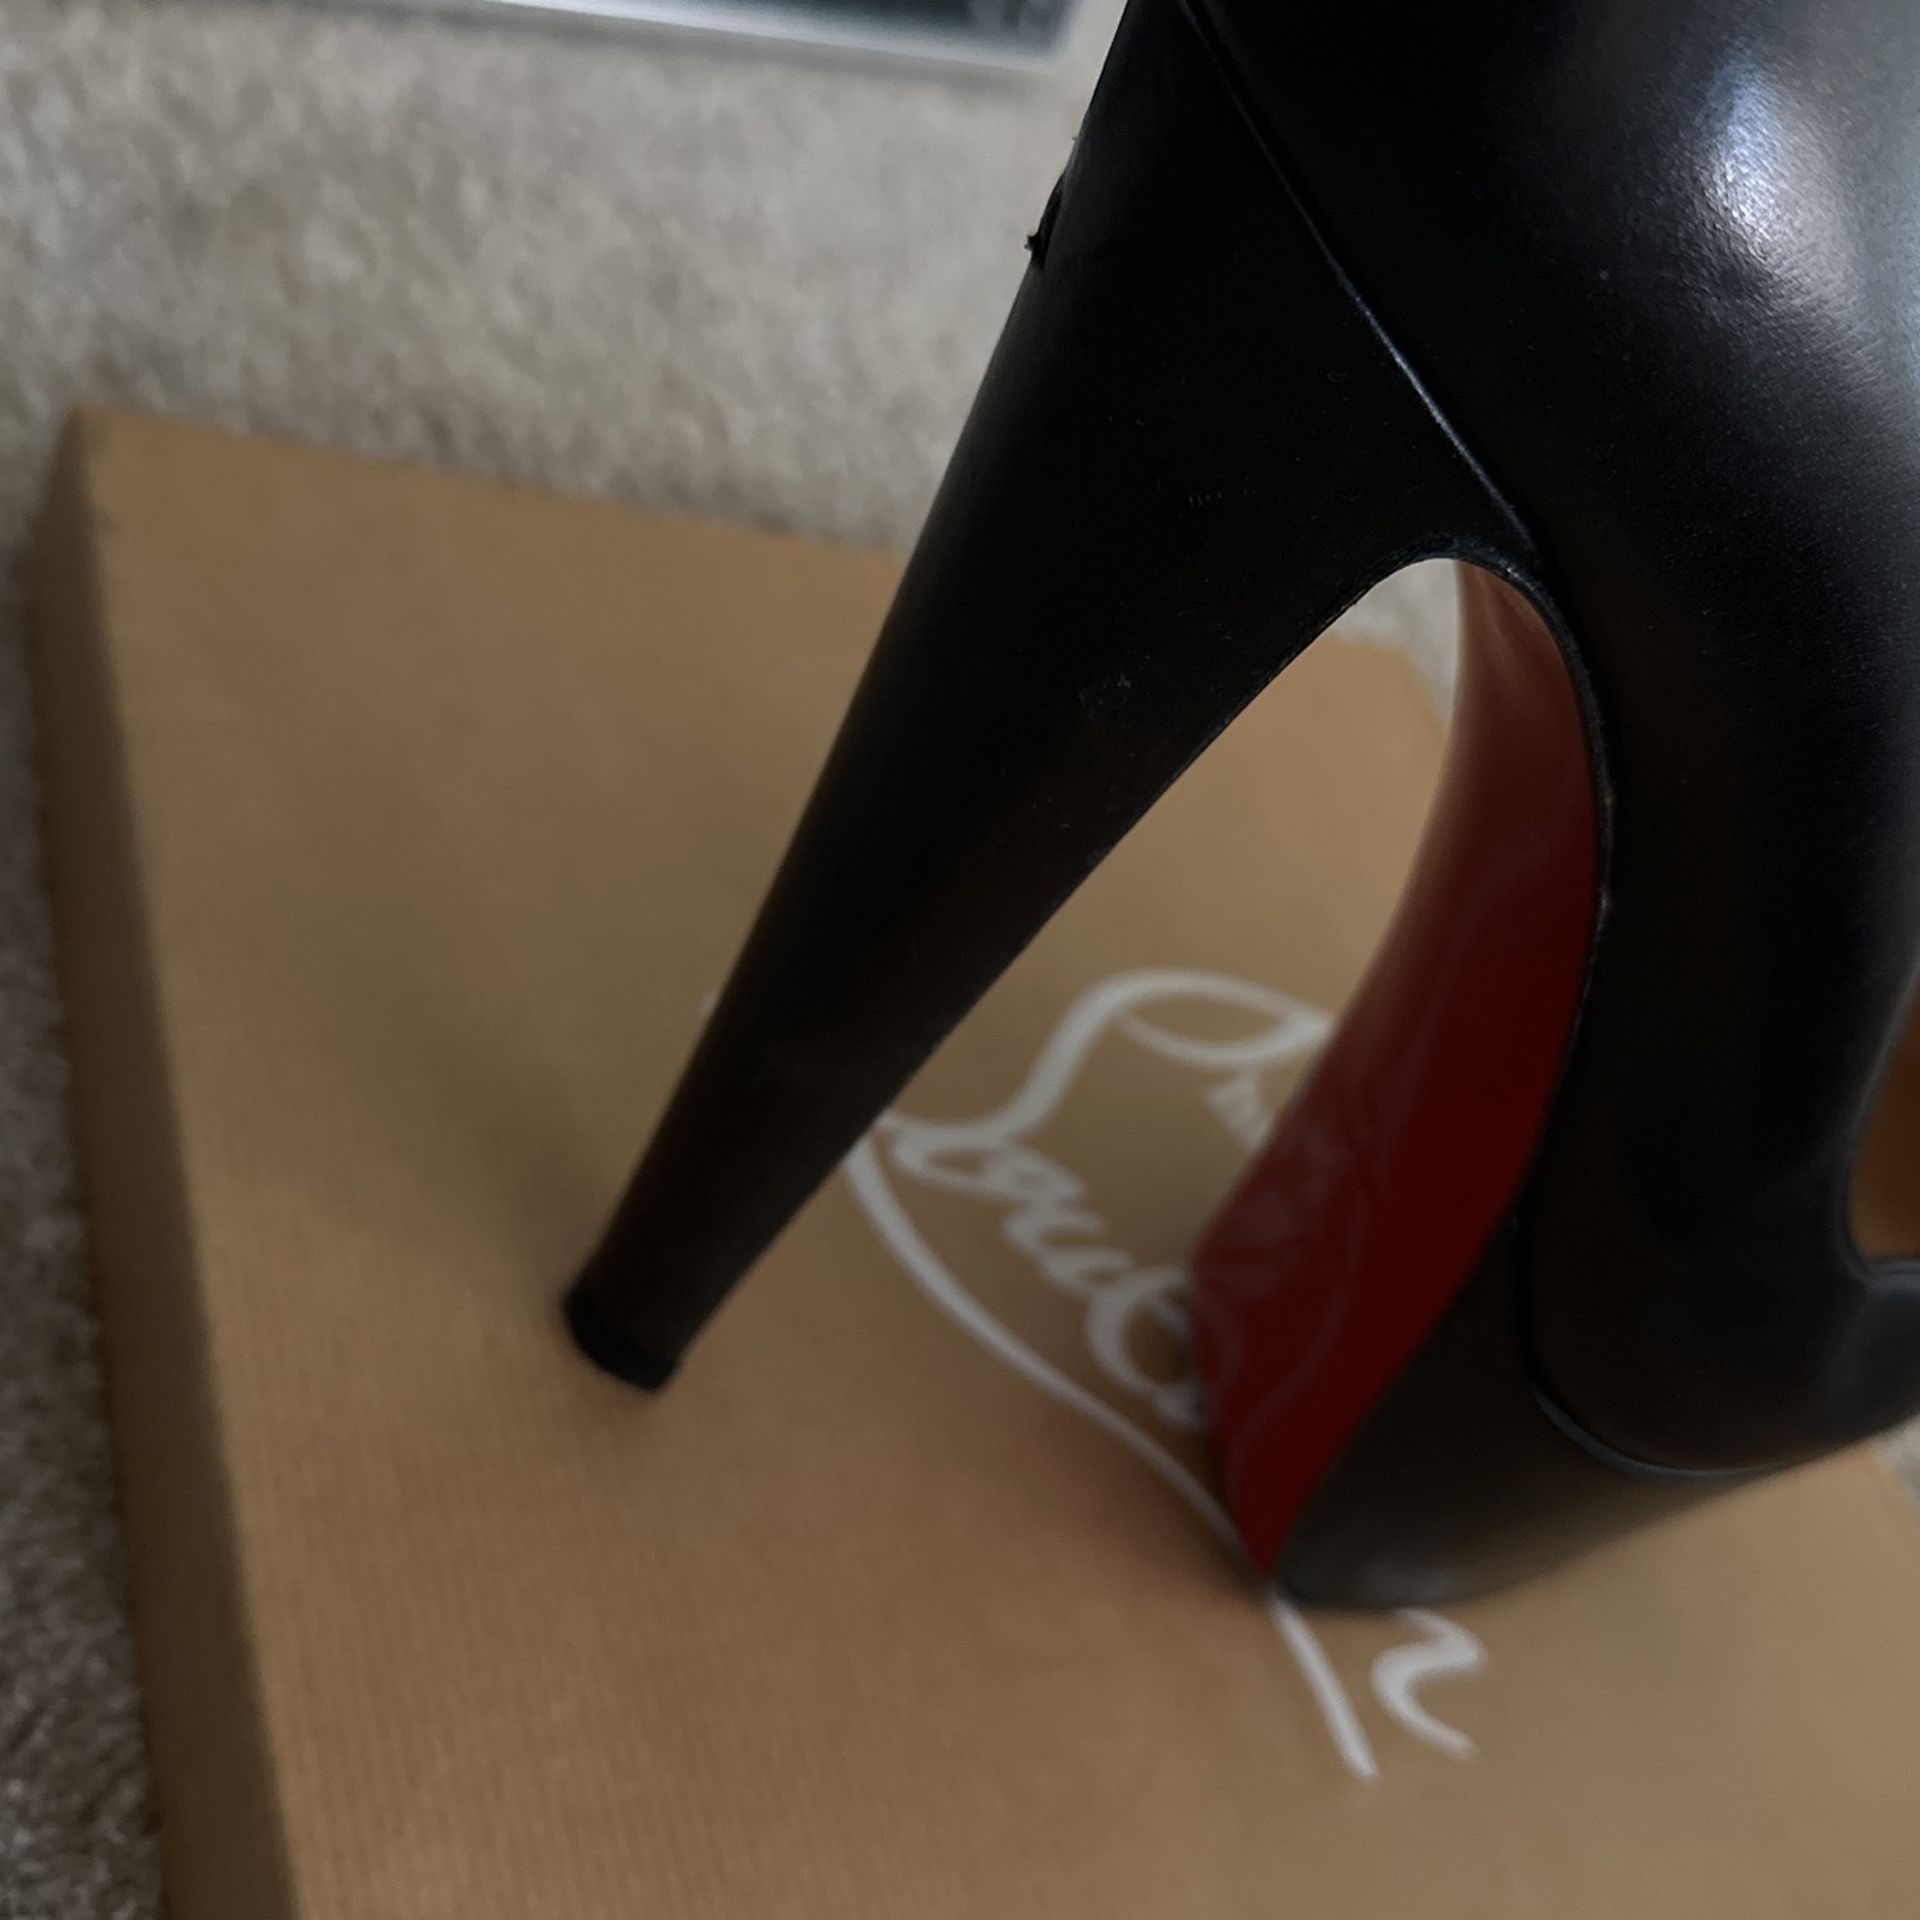 christian louboutin heels for Sale in Rancho Cucamonga, CA - OfferUp